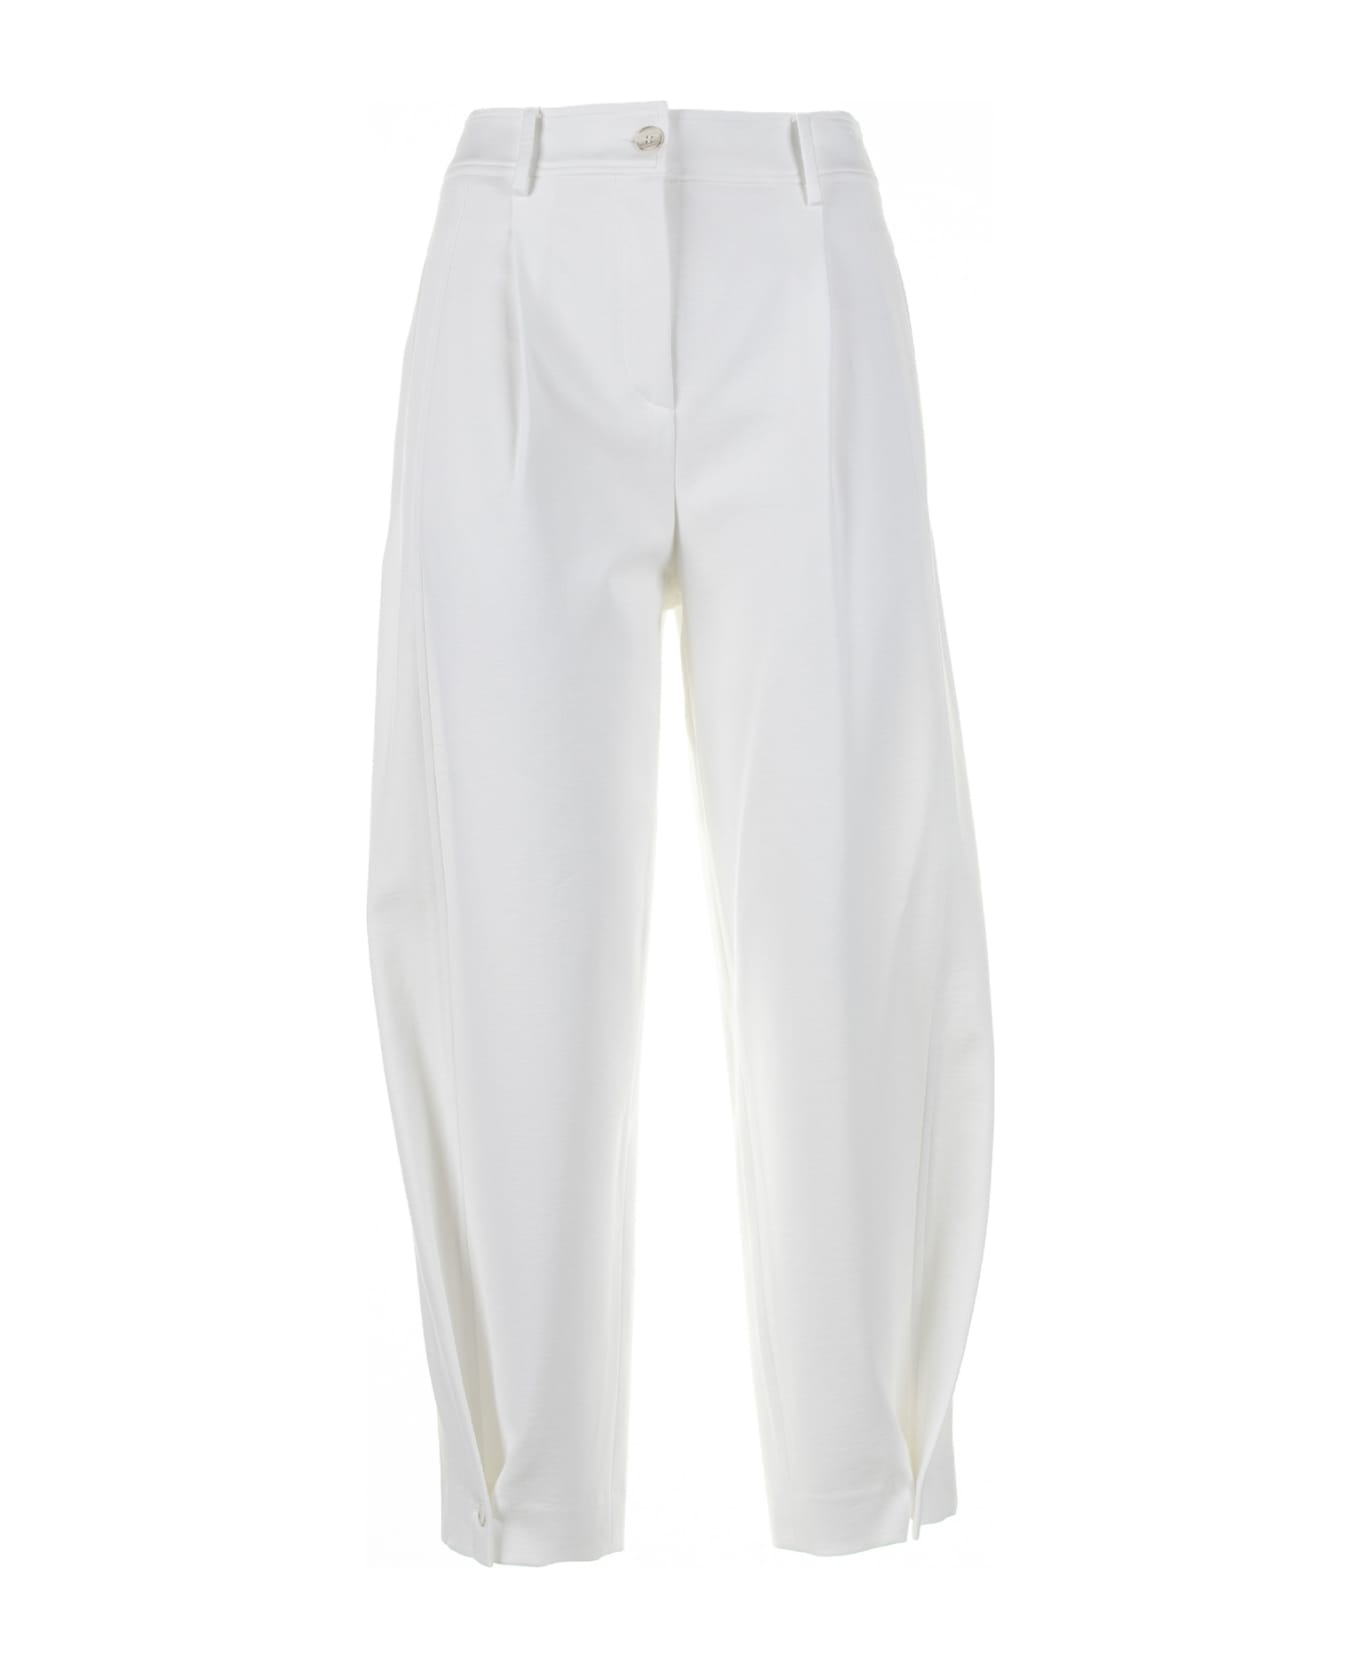 Via Masini 80 White Trousers With Buttons At The Ankle - PANNA